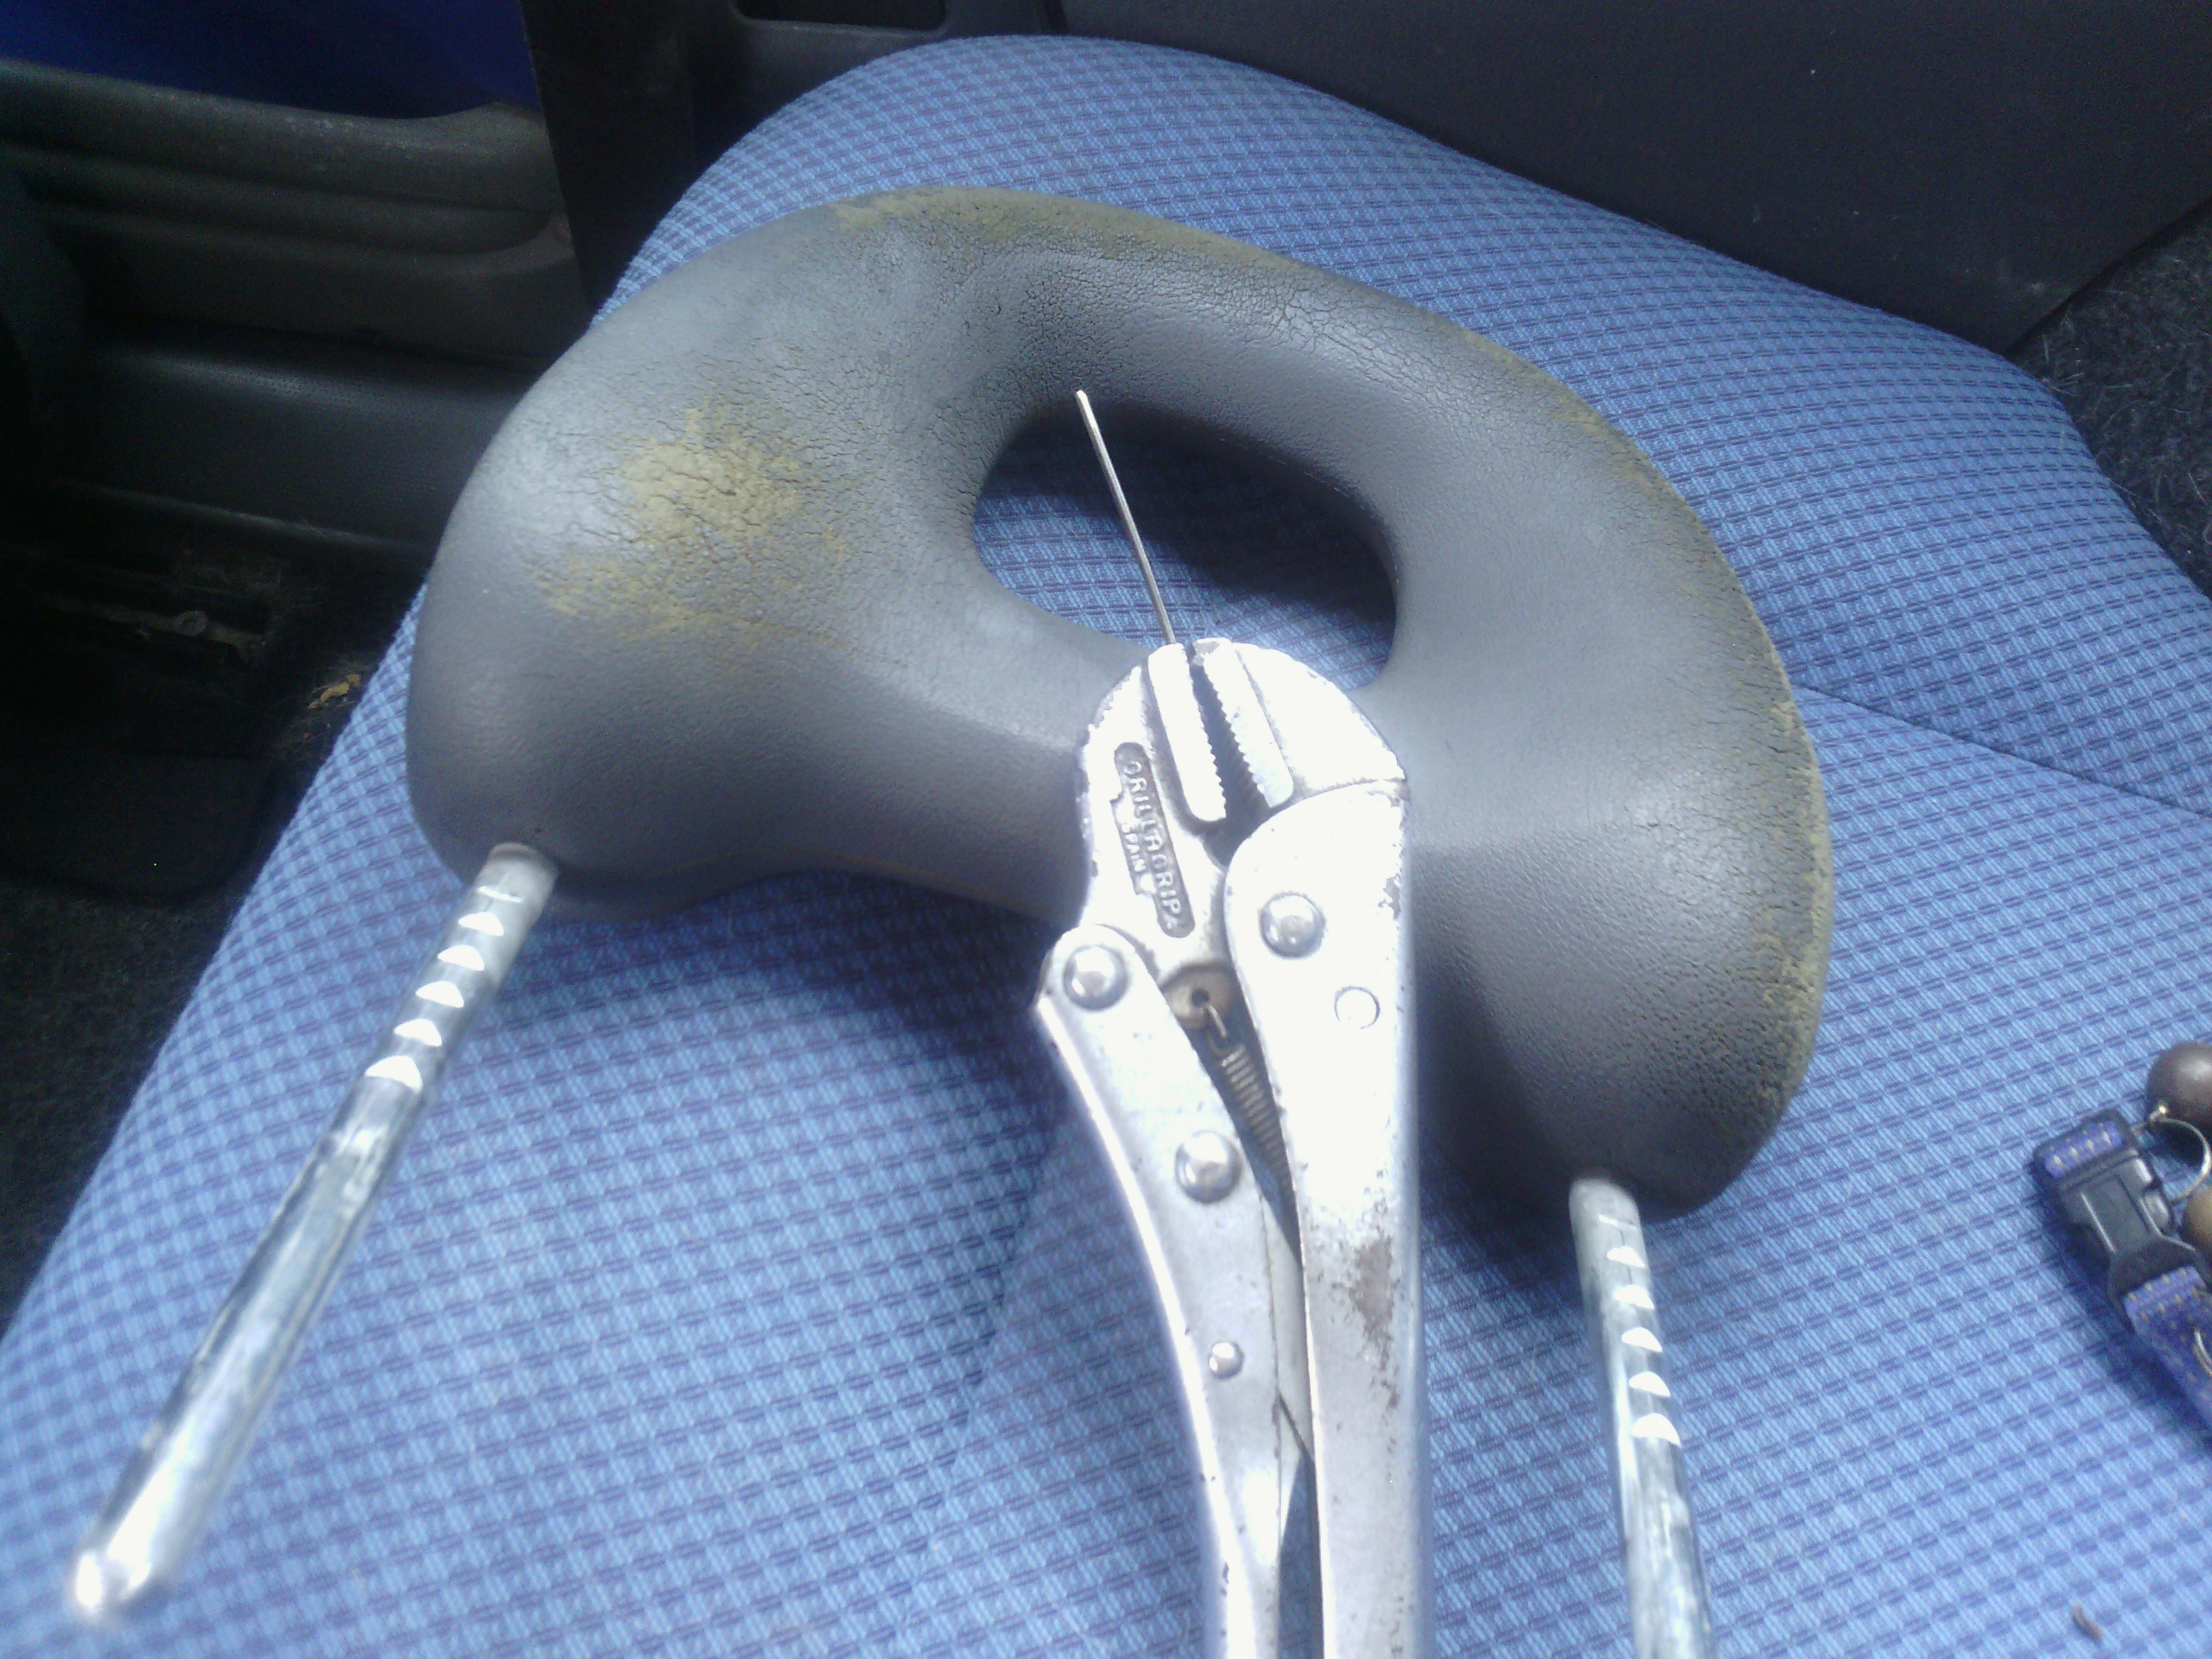 Headrest removal tools